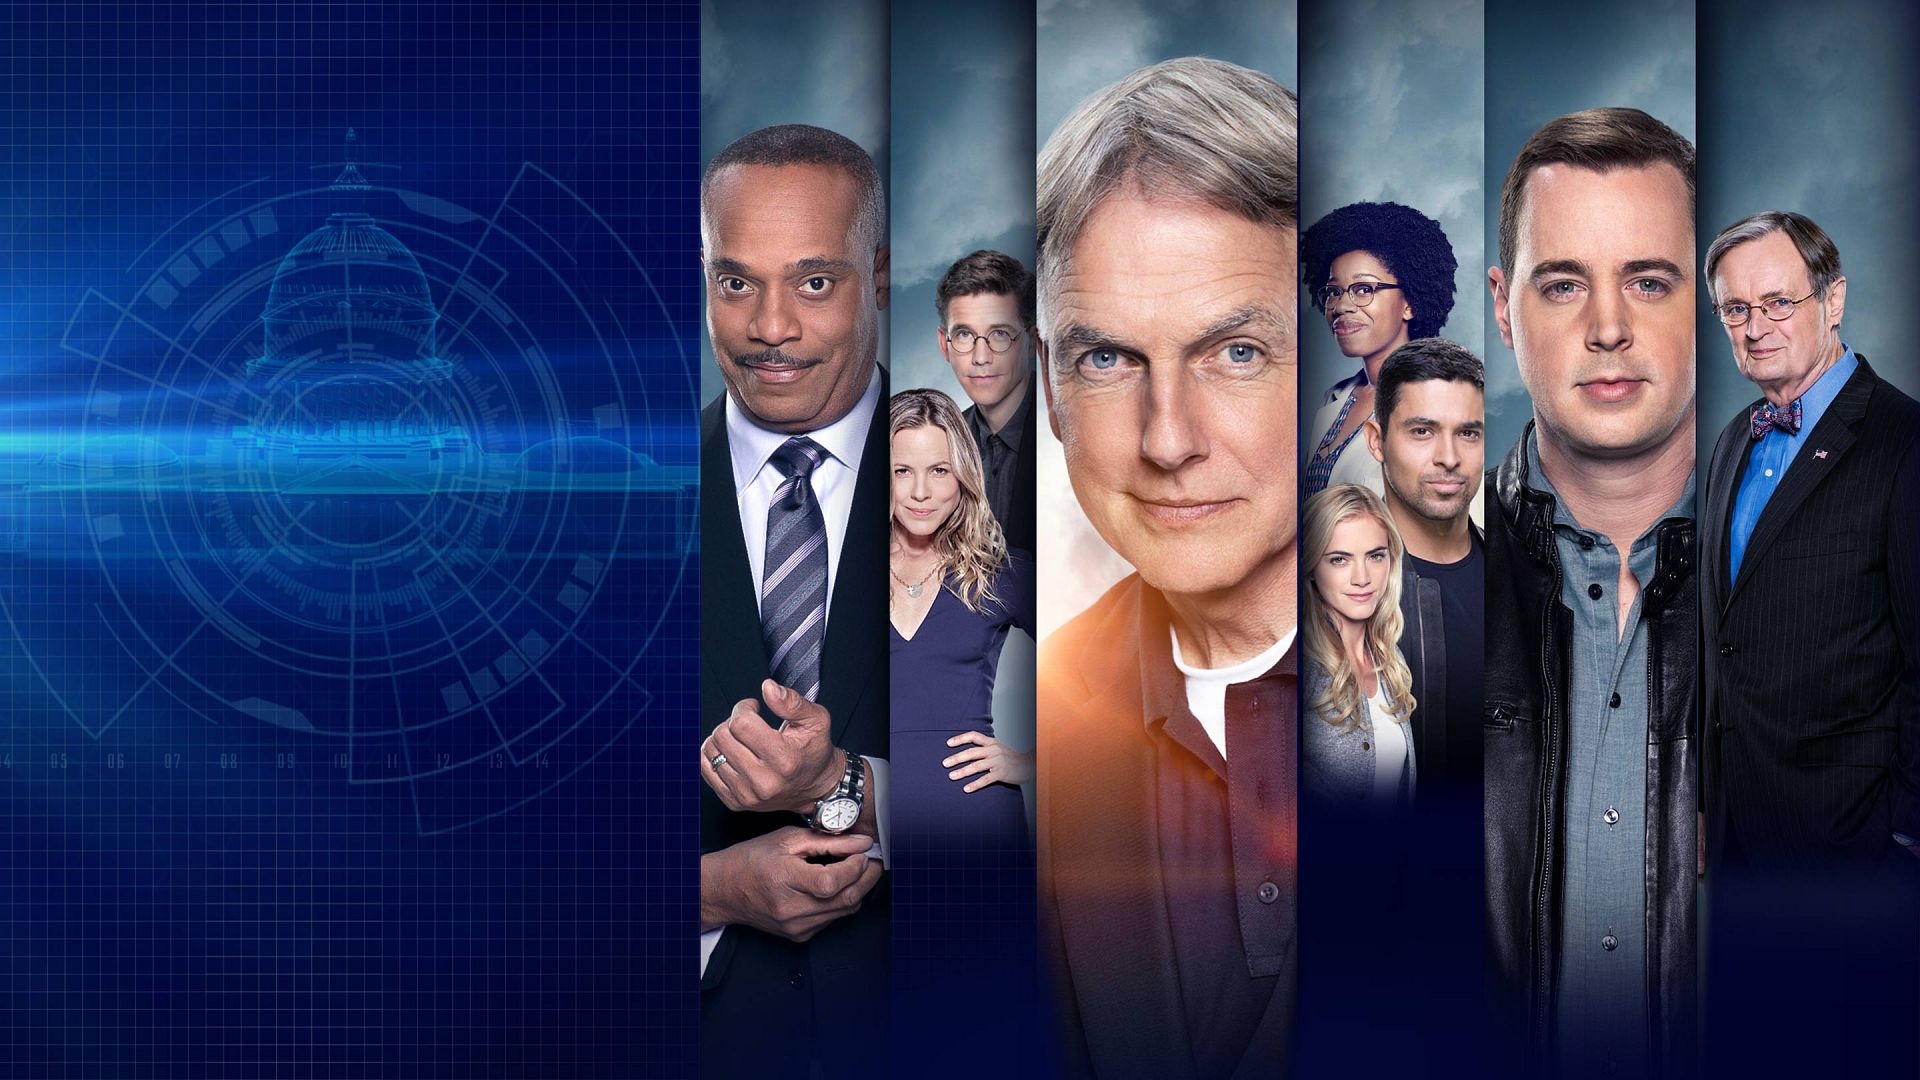 NCIS: Naval Criminal Investigative Service: Long-running CBS series, Season 17, A fictional team of Special Agents of the Major Case Response Team. 1920x1080 Full HD Background.